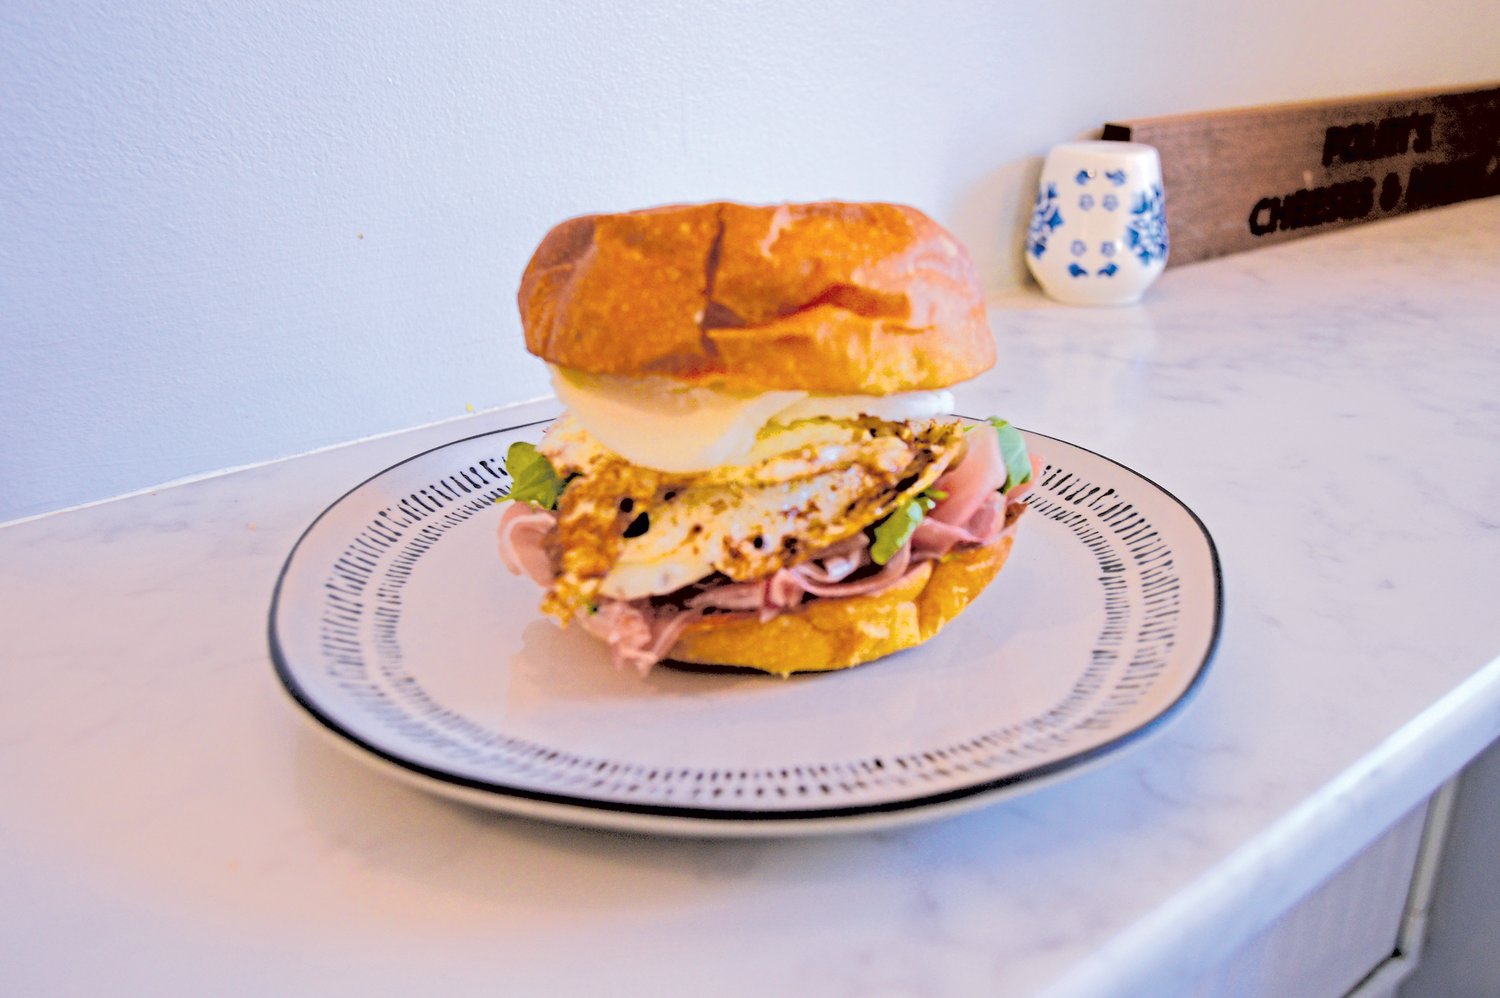 The café’s popular prosciutto egg sandwich includes two eggs, chorizo, habanero jack cheese and hot honey on a brioche bun. Photograph by Susan S. Yeske.